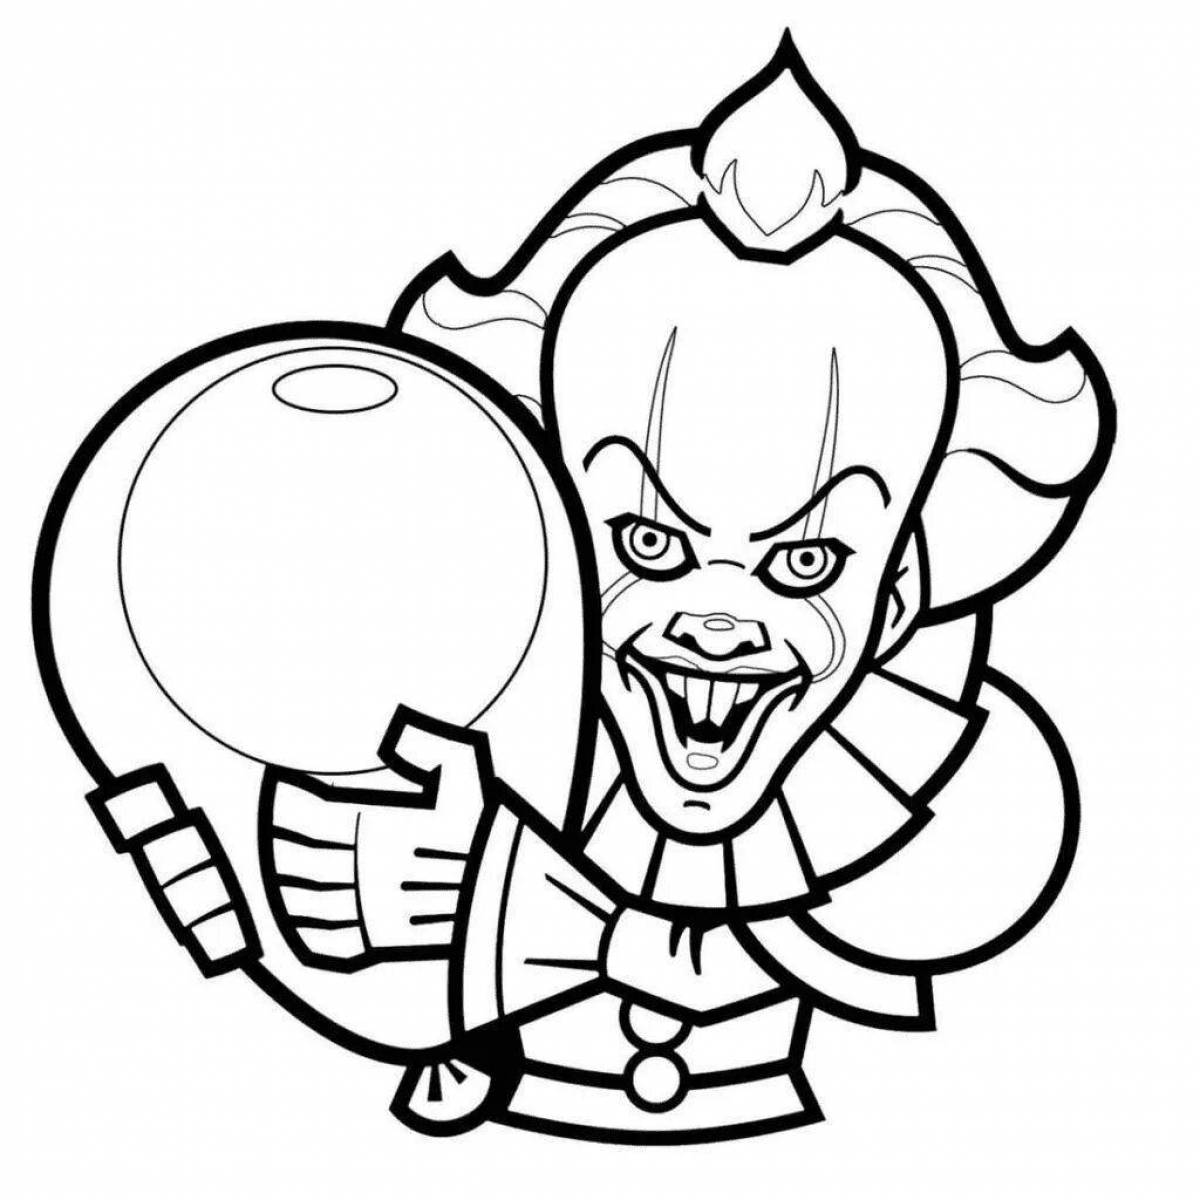 Chilling pennywise coloring book